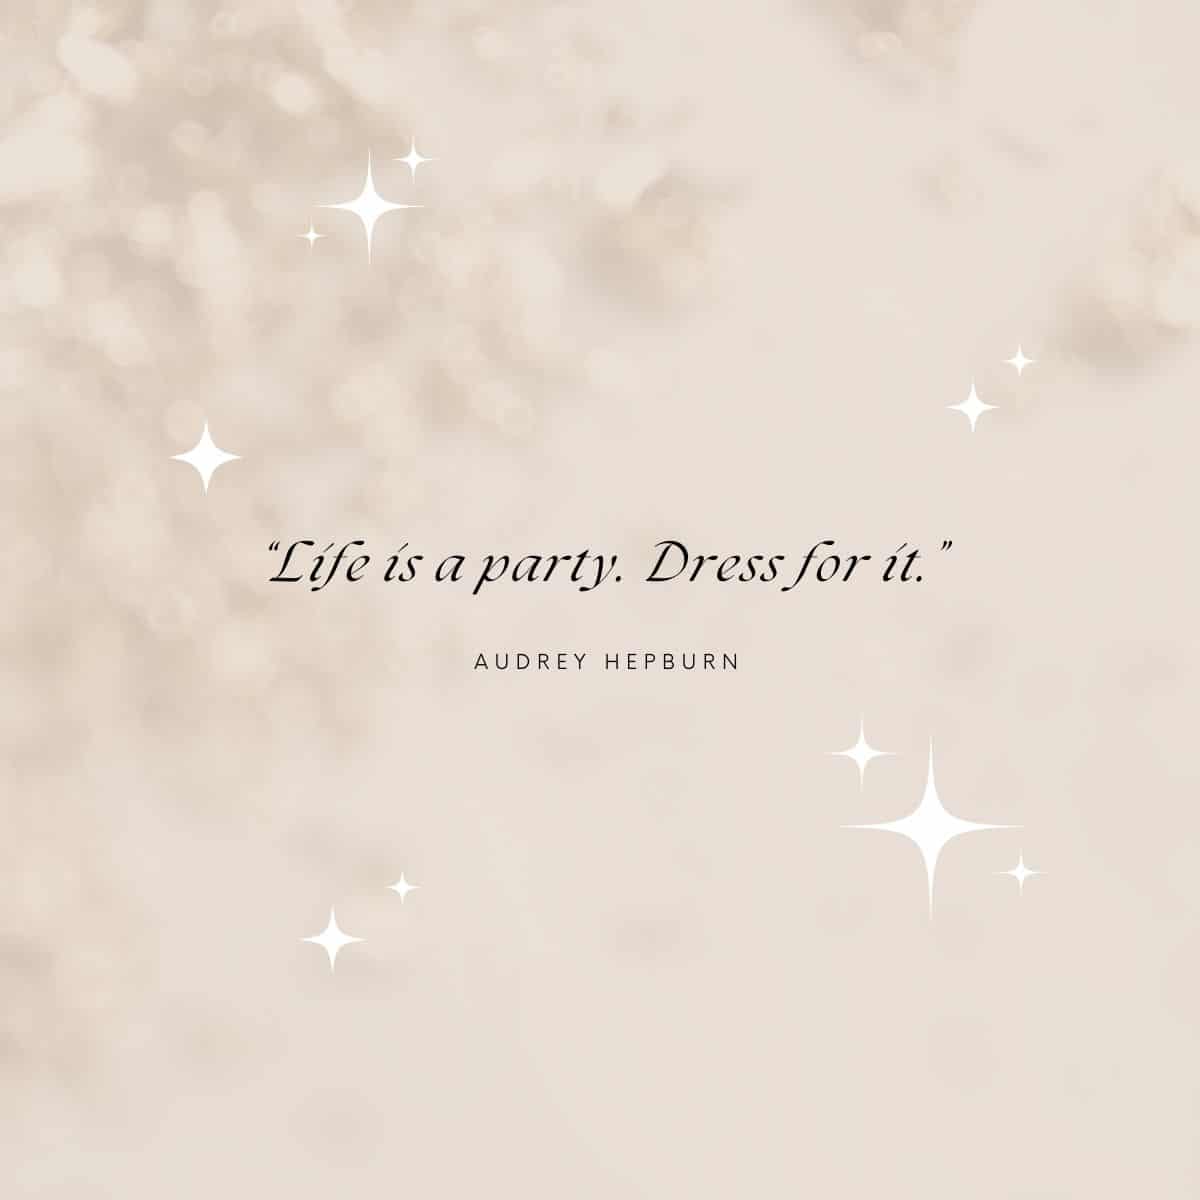 life is a party, dress for it - audrey hepbrun